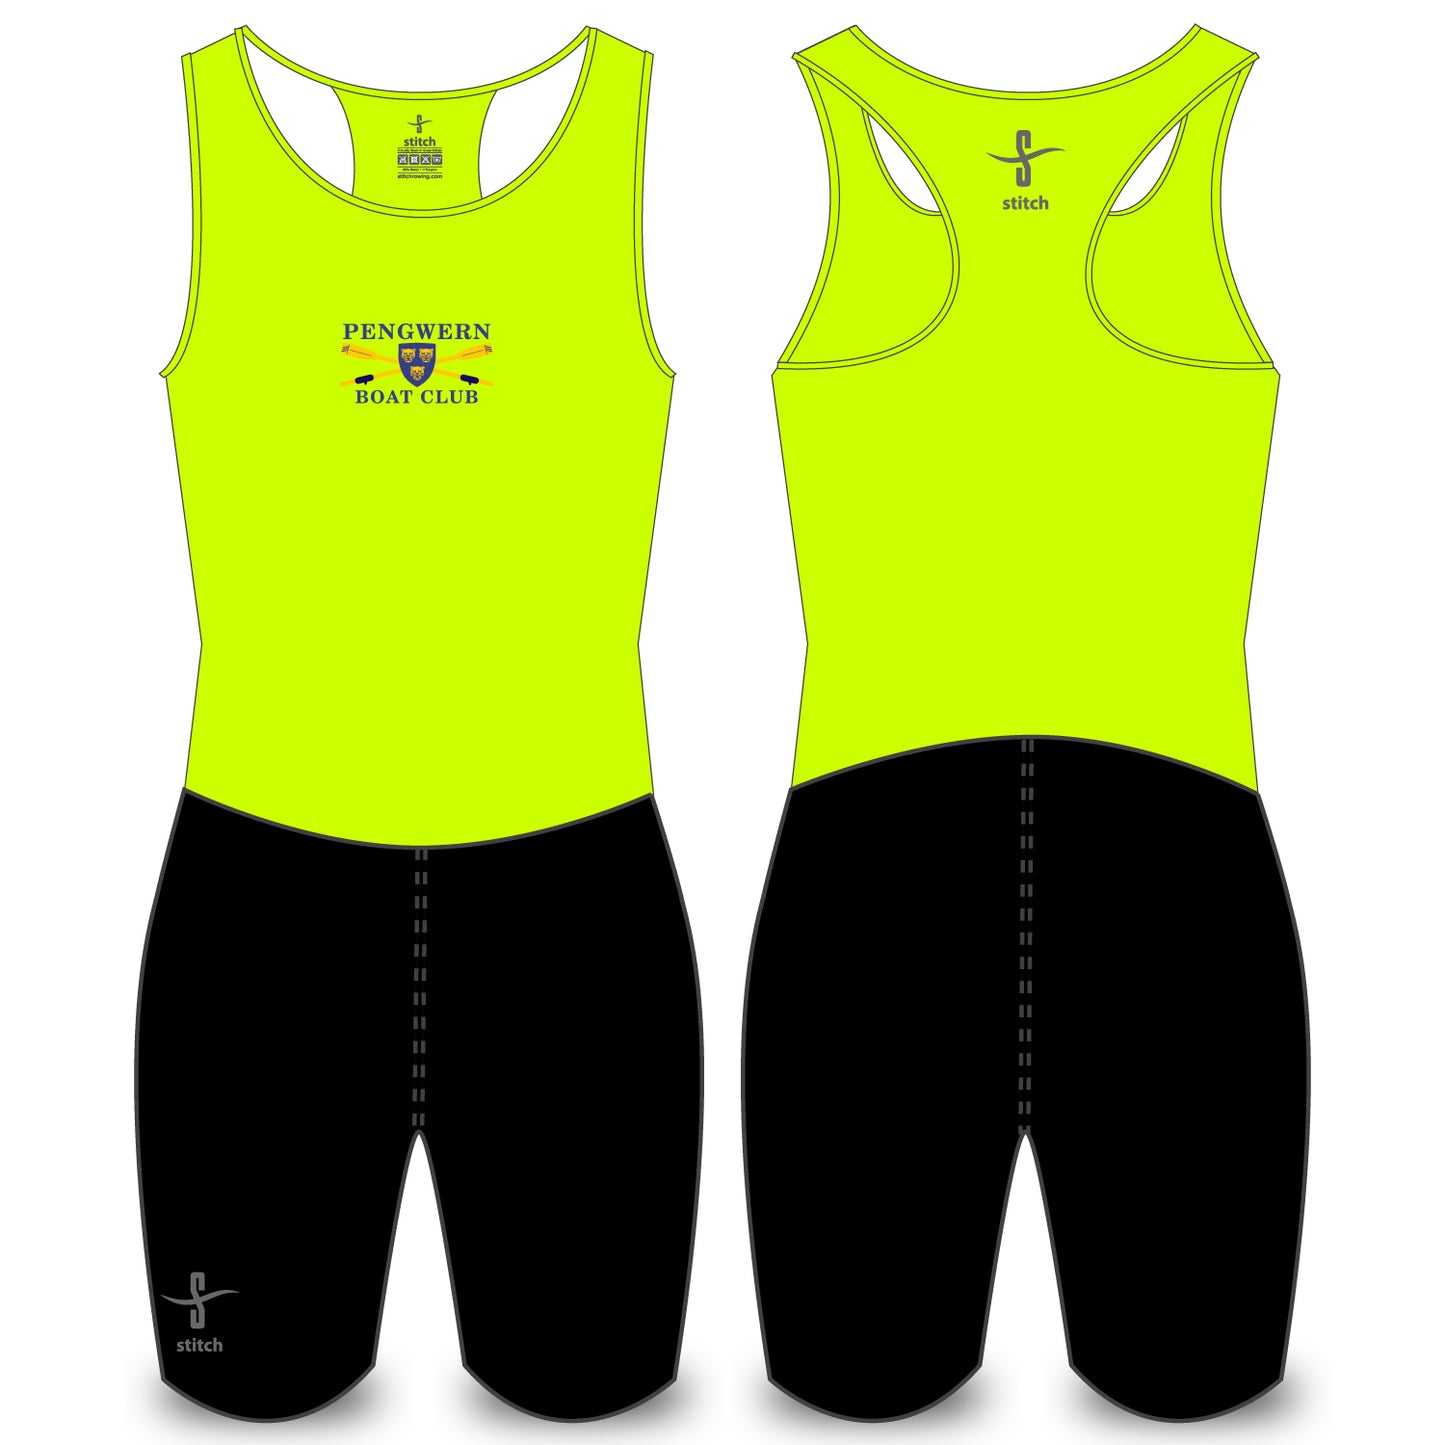 Pengwern Boat Club Fluorescent Yellow AIO